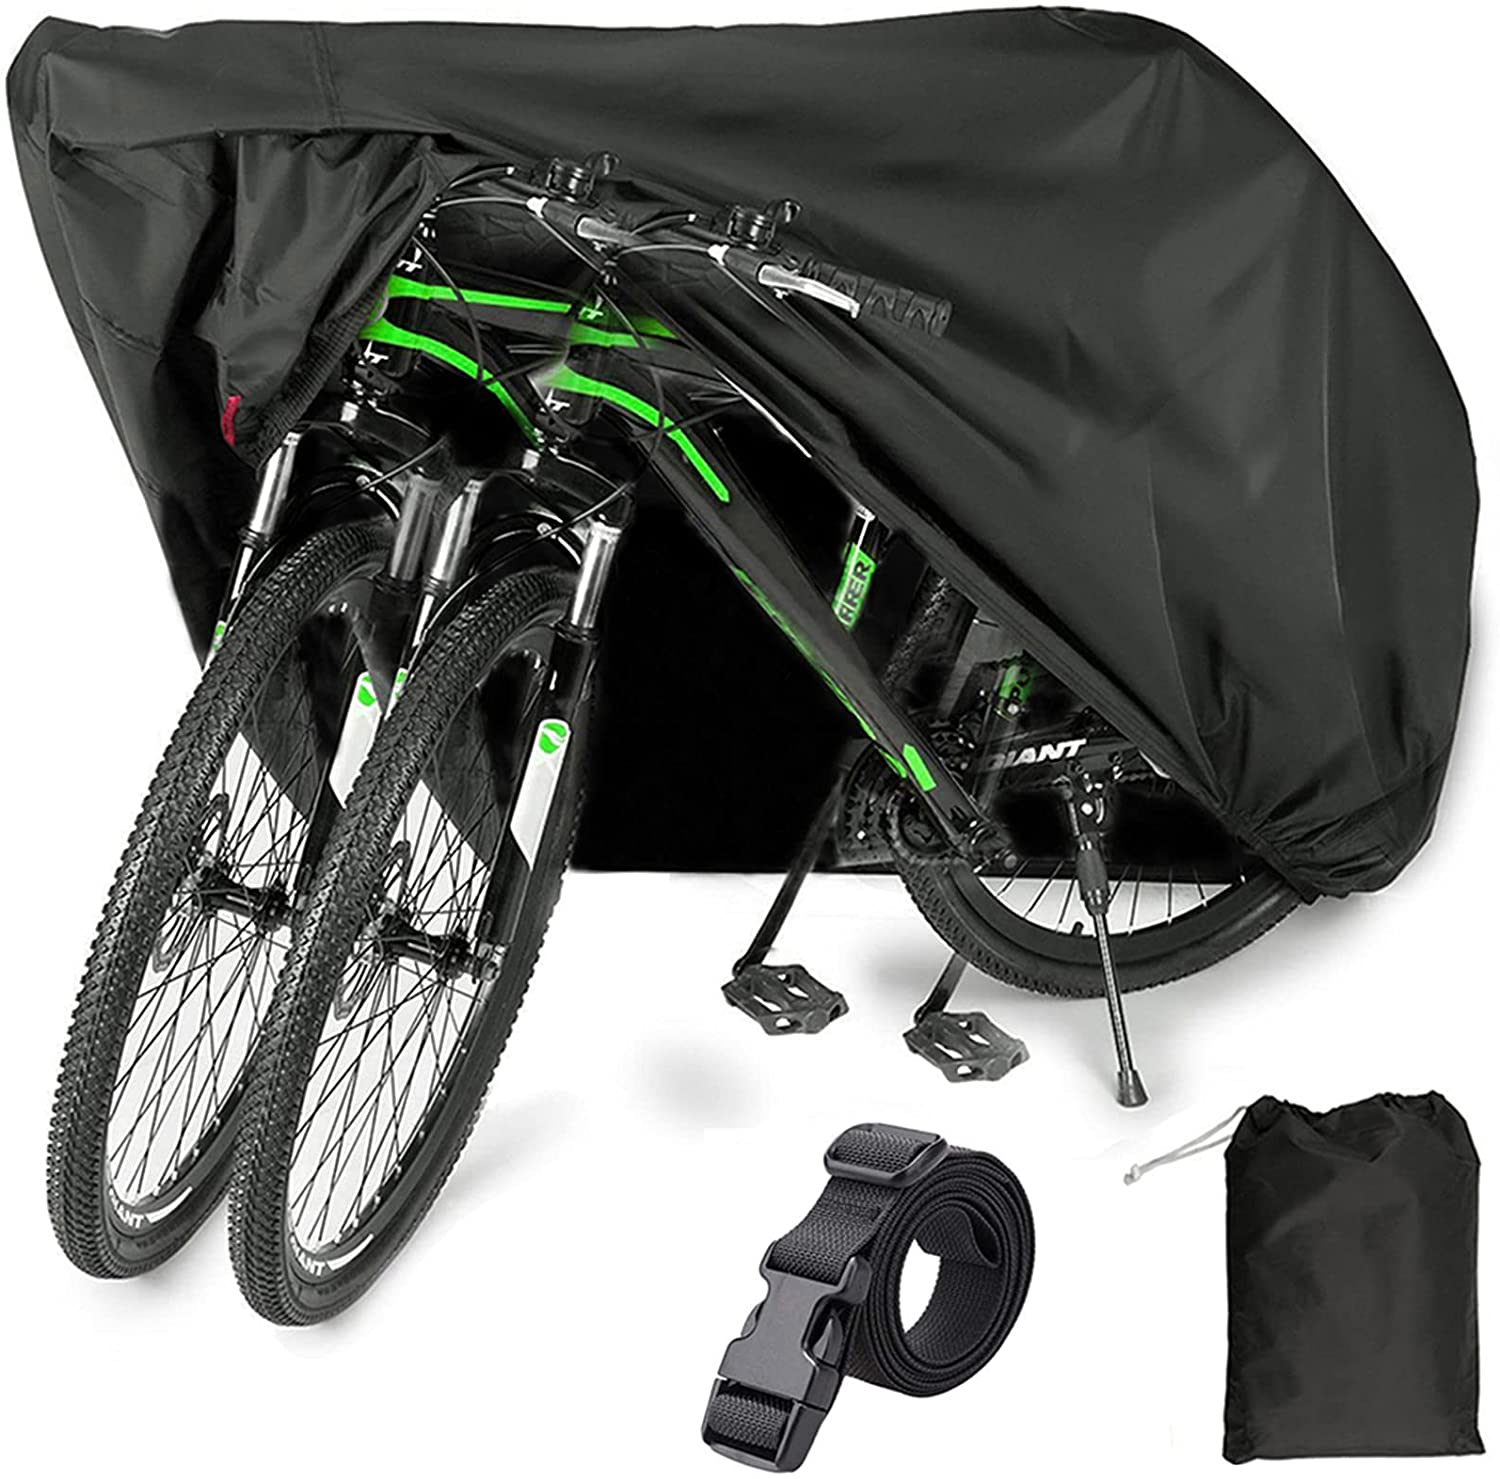 Heavy Duty Bike Cover Outdoor Waterproof Bicycle Covers Rain Sun Dust Wind Proof with Lock Hole for Mountain Road Electric Bike